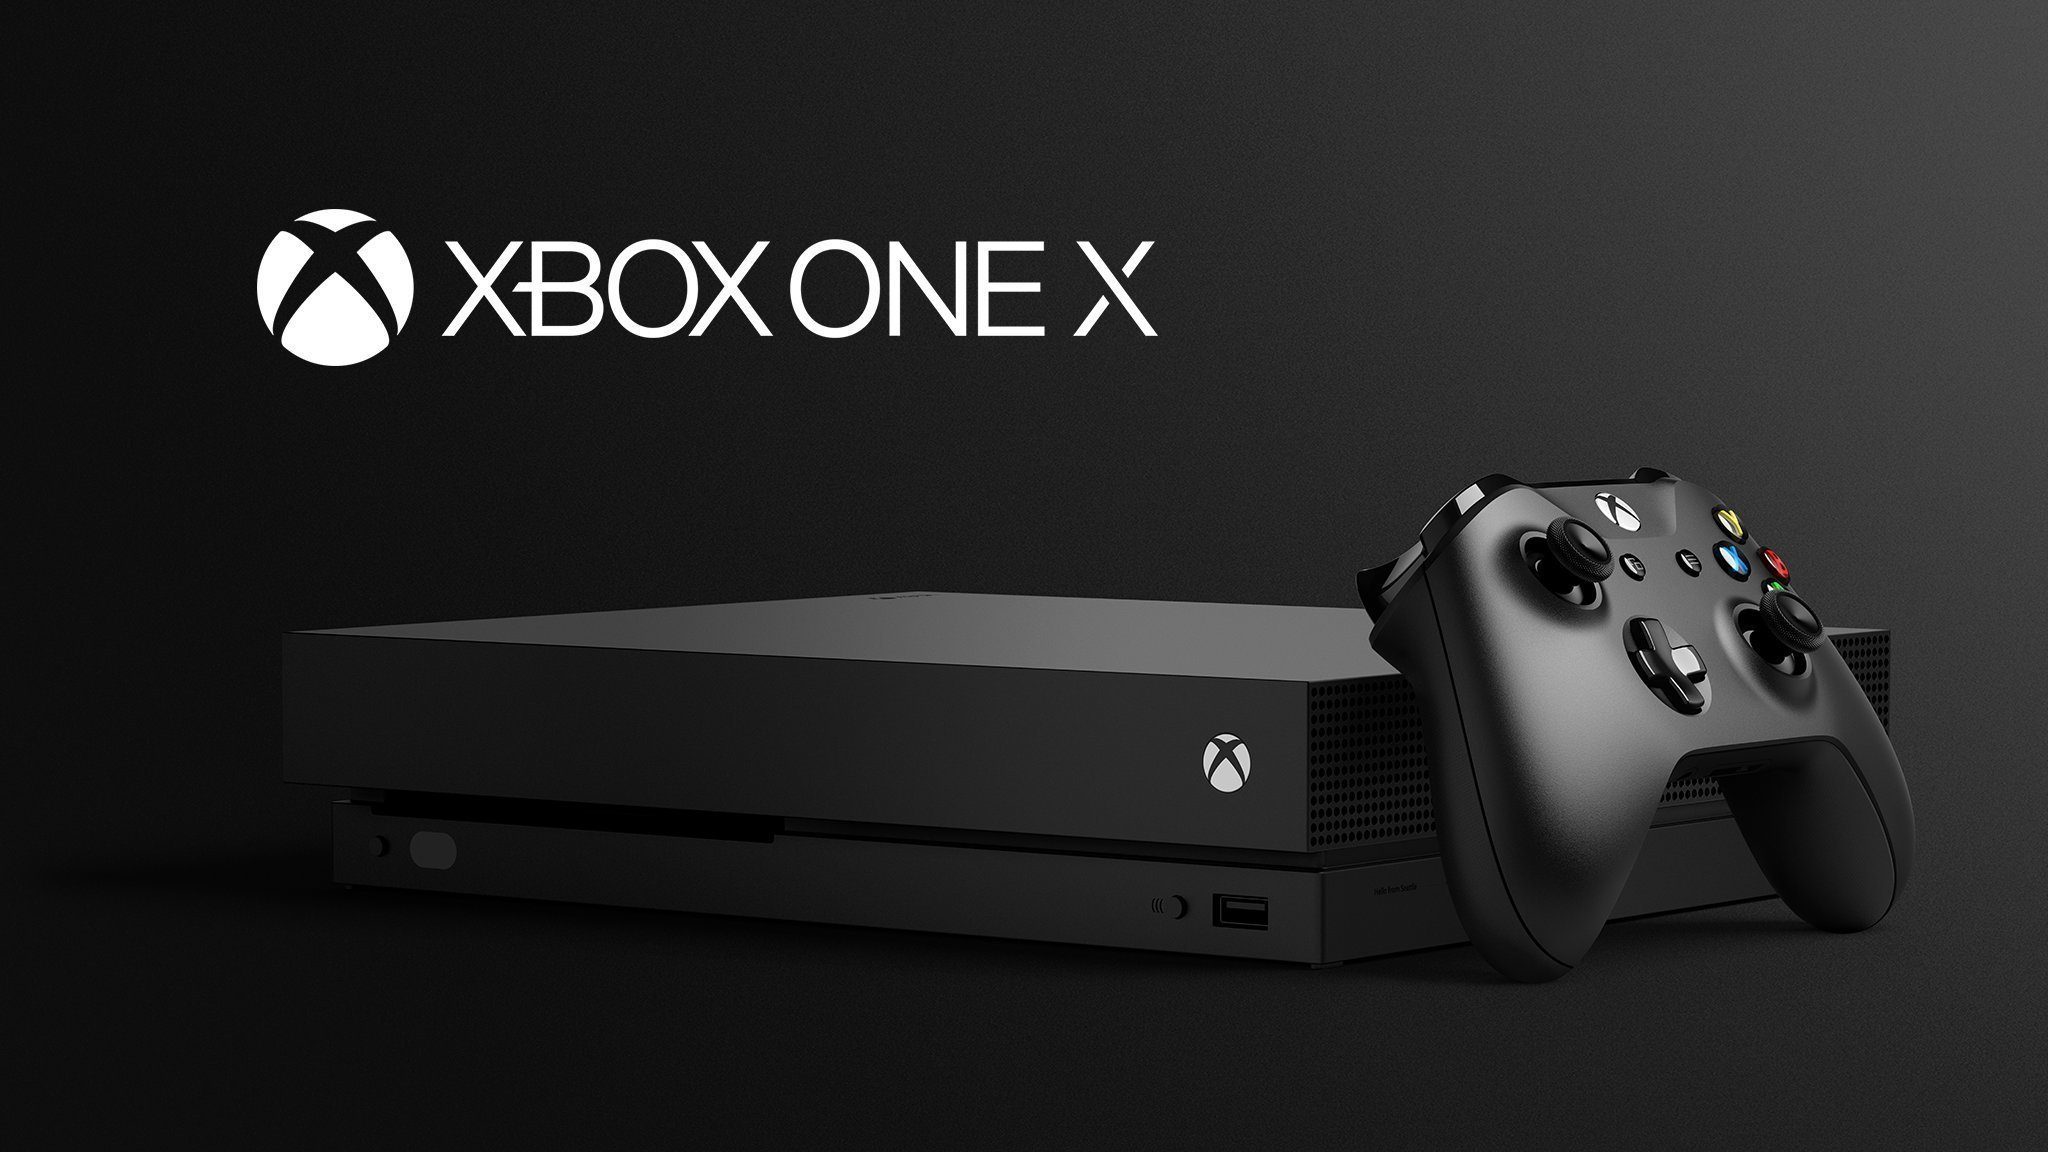 Xbox may be about to exit the gaming business for good